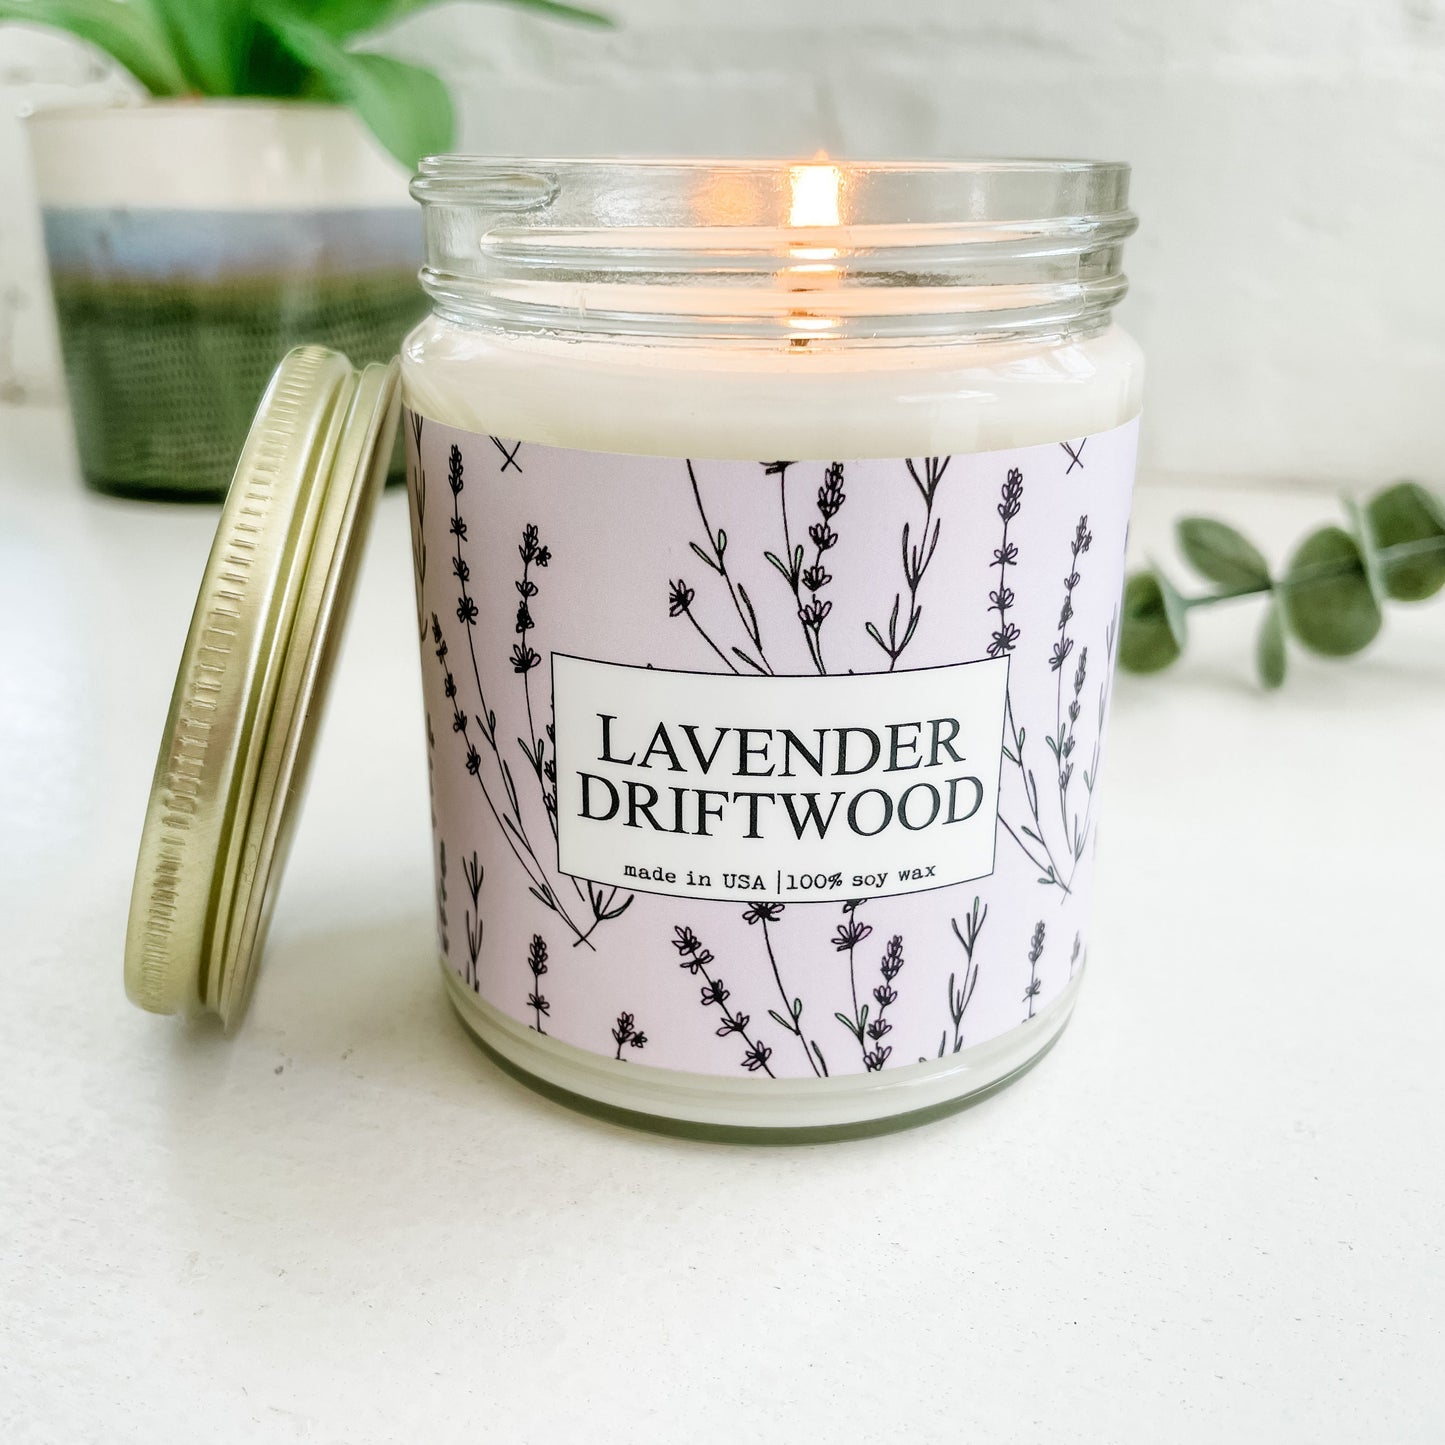 Lavender Driftwood Scented Candle - 9oz Glass Jar Soy Candle